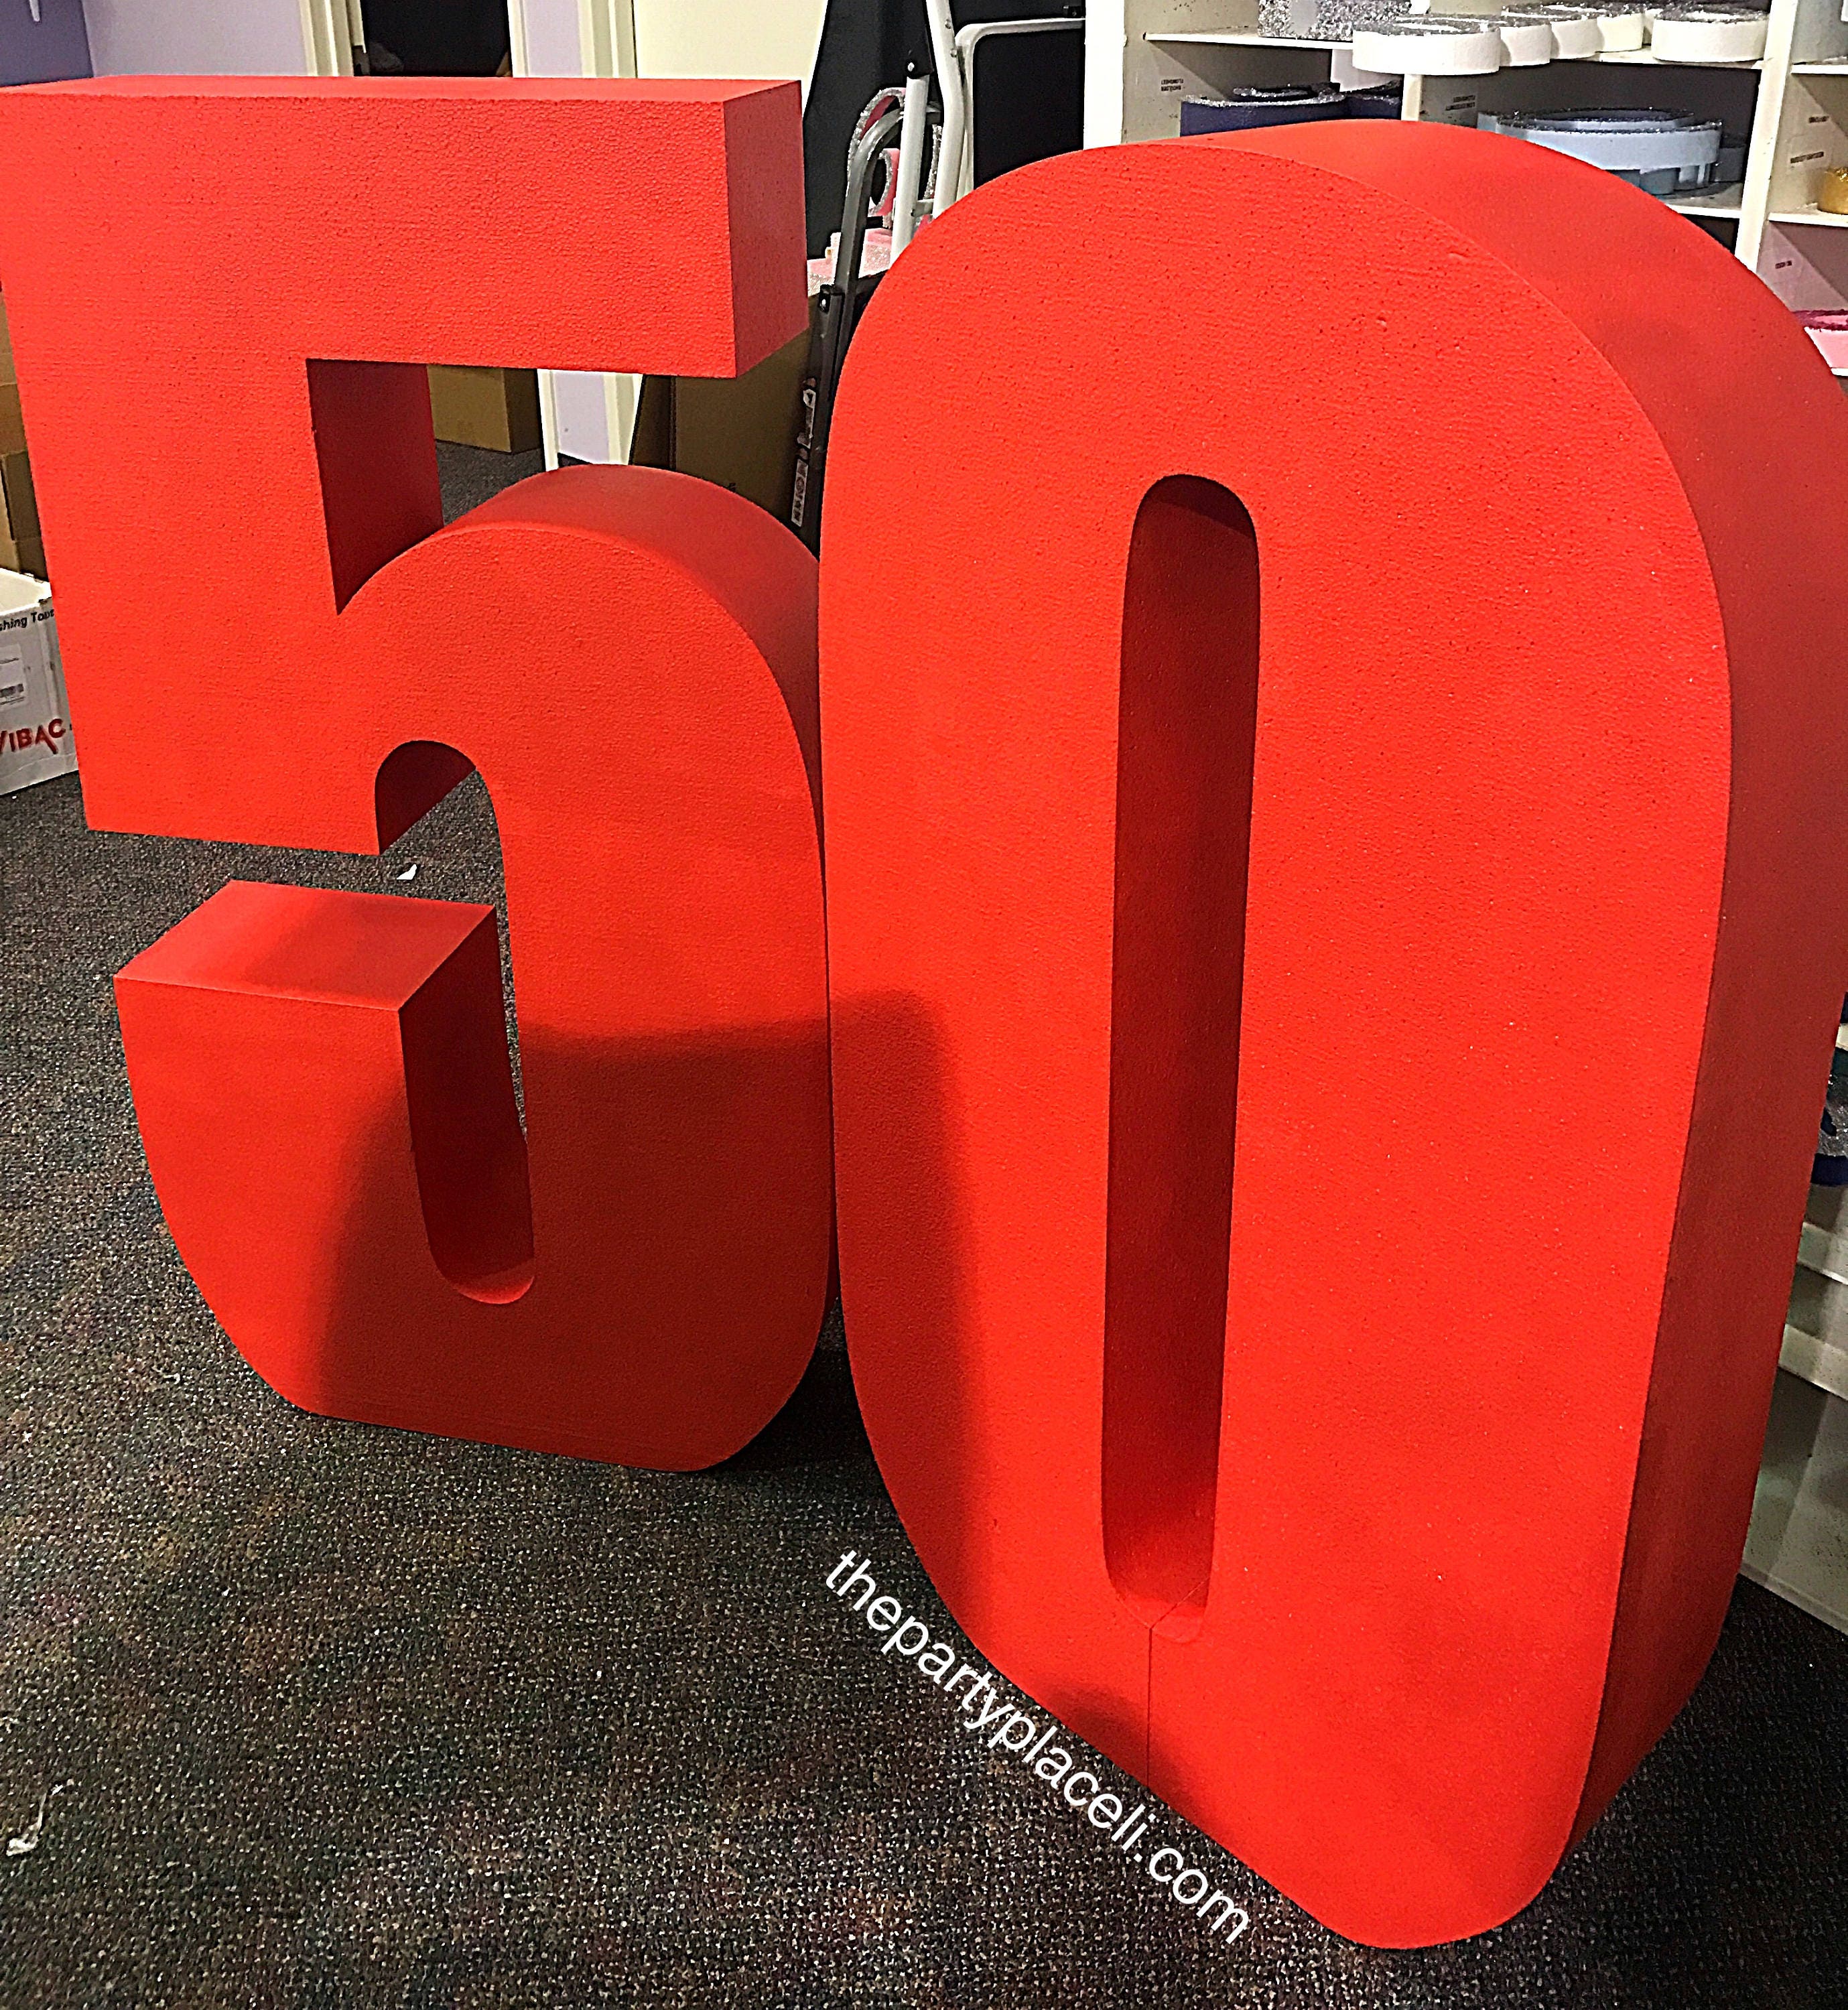 Big Cardboard Numbers 12 High Choose From 0 1 2 3 4 5 6 7 8 9 These Paper  Mache Numbers Are a Full Foot Tall 